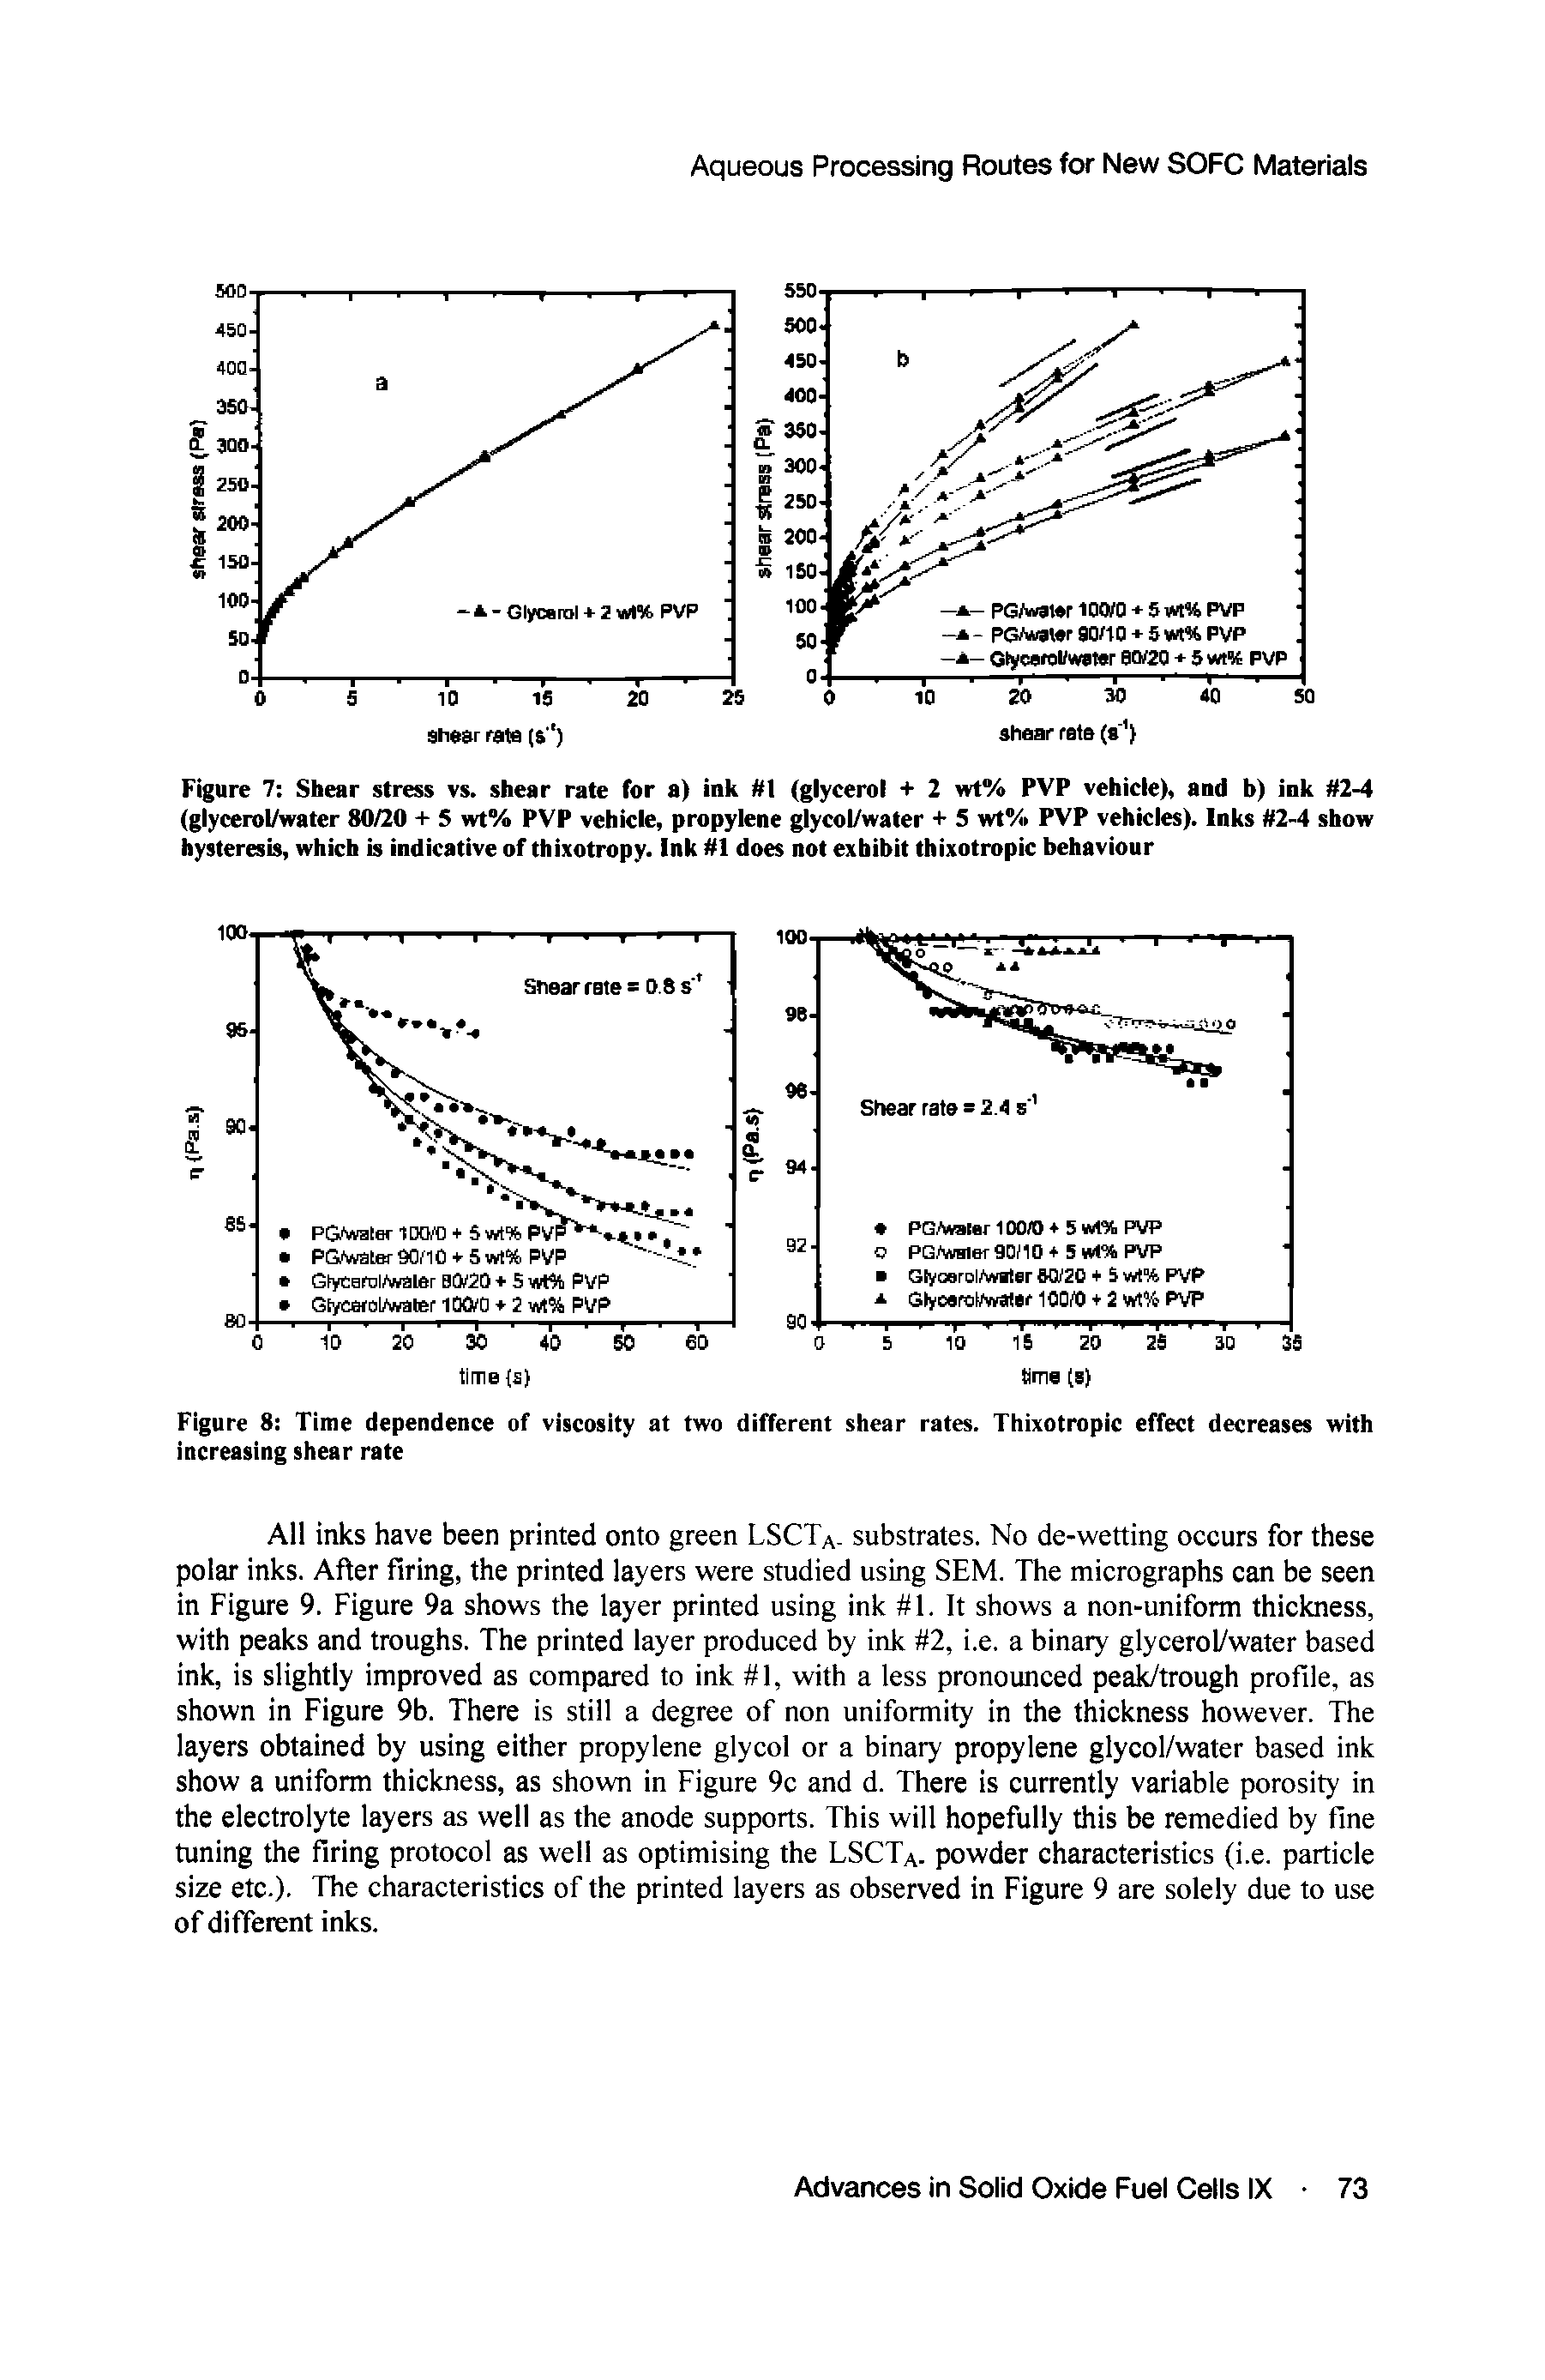 Figure 7 Shear stress vs. shear rate for a) ink 1 (glycerol + 2 wt% PVP vehicle), and b) ink 2-4 (glycerolAvater 80/20 -t- 5 wt% PVP vehicle, propylene glycol/water + S wt% PVP vehkks). Inks 2-4 show hysteresis, which is indicative of thixotropy. Ink 1 does not exhibit thixotropic behaviour...